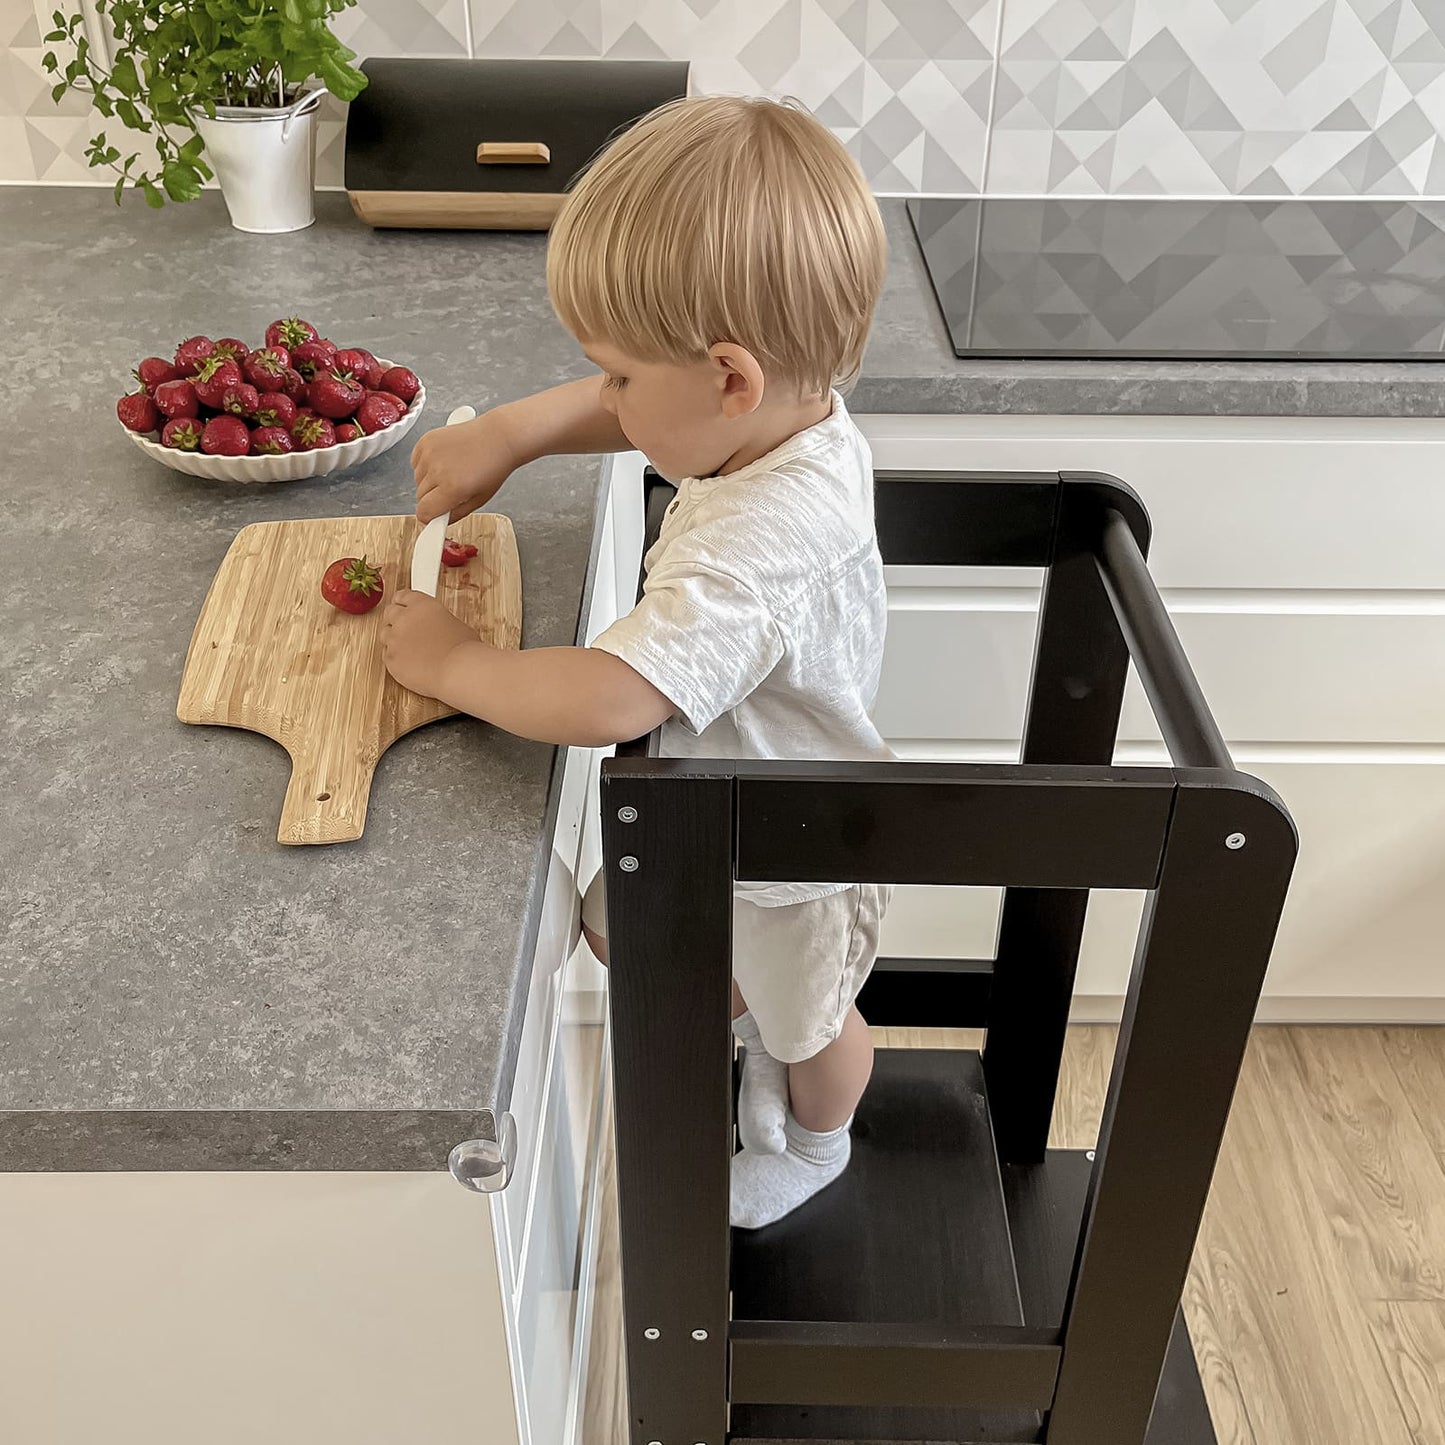 MeowBaby Wooden Kitchen Helper - Learning Tower For Kids